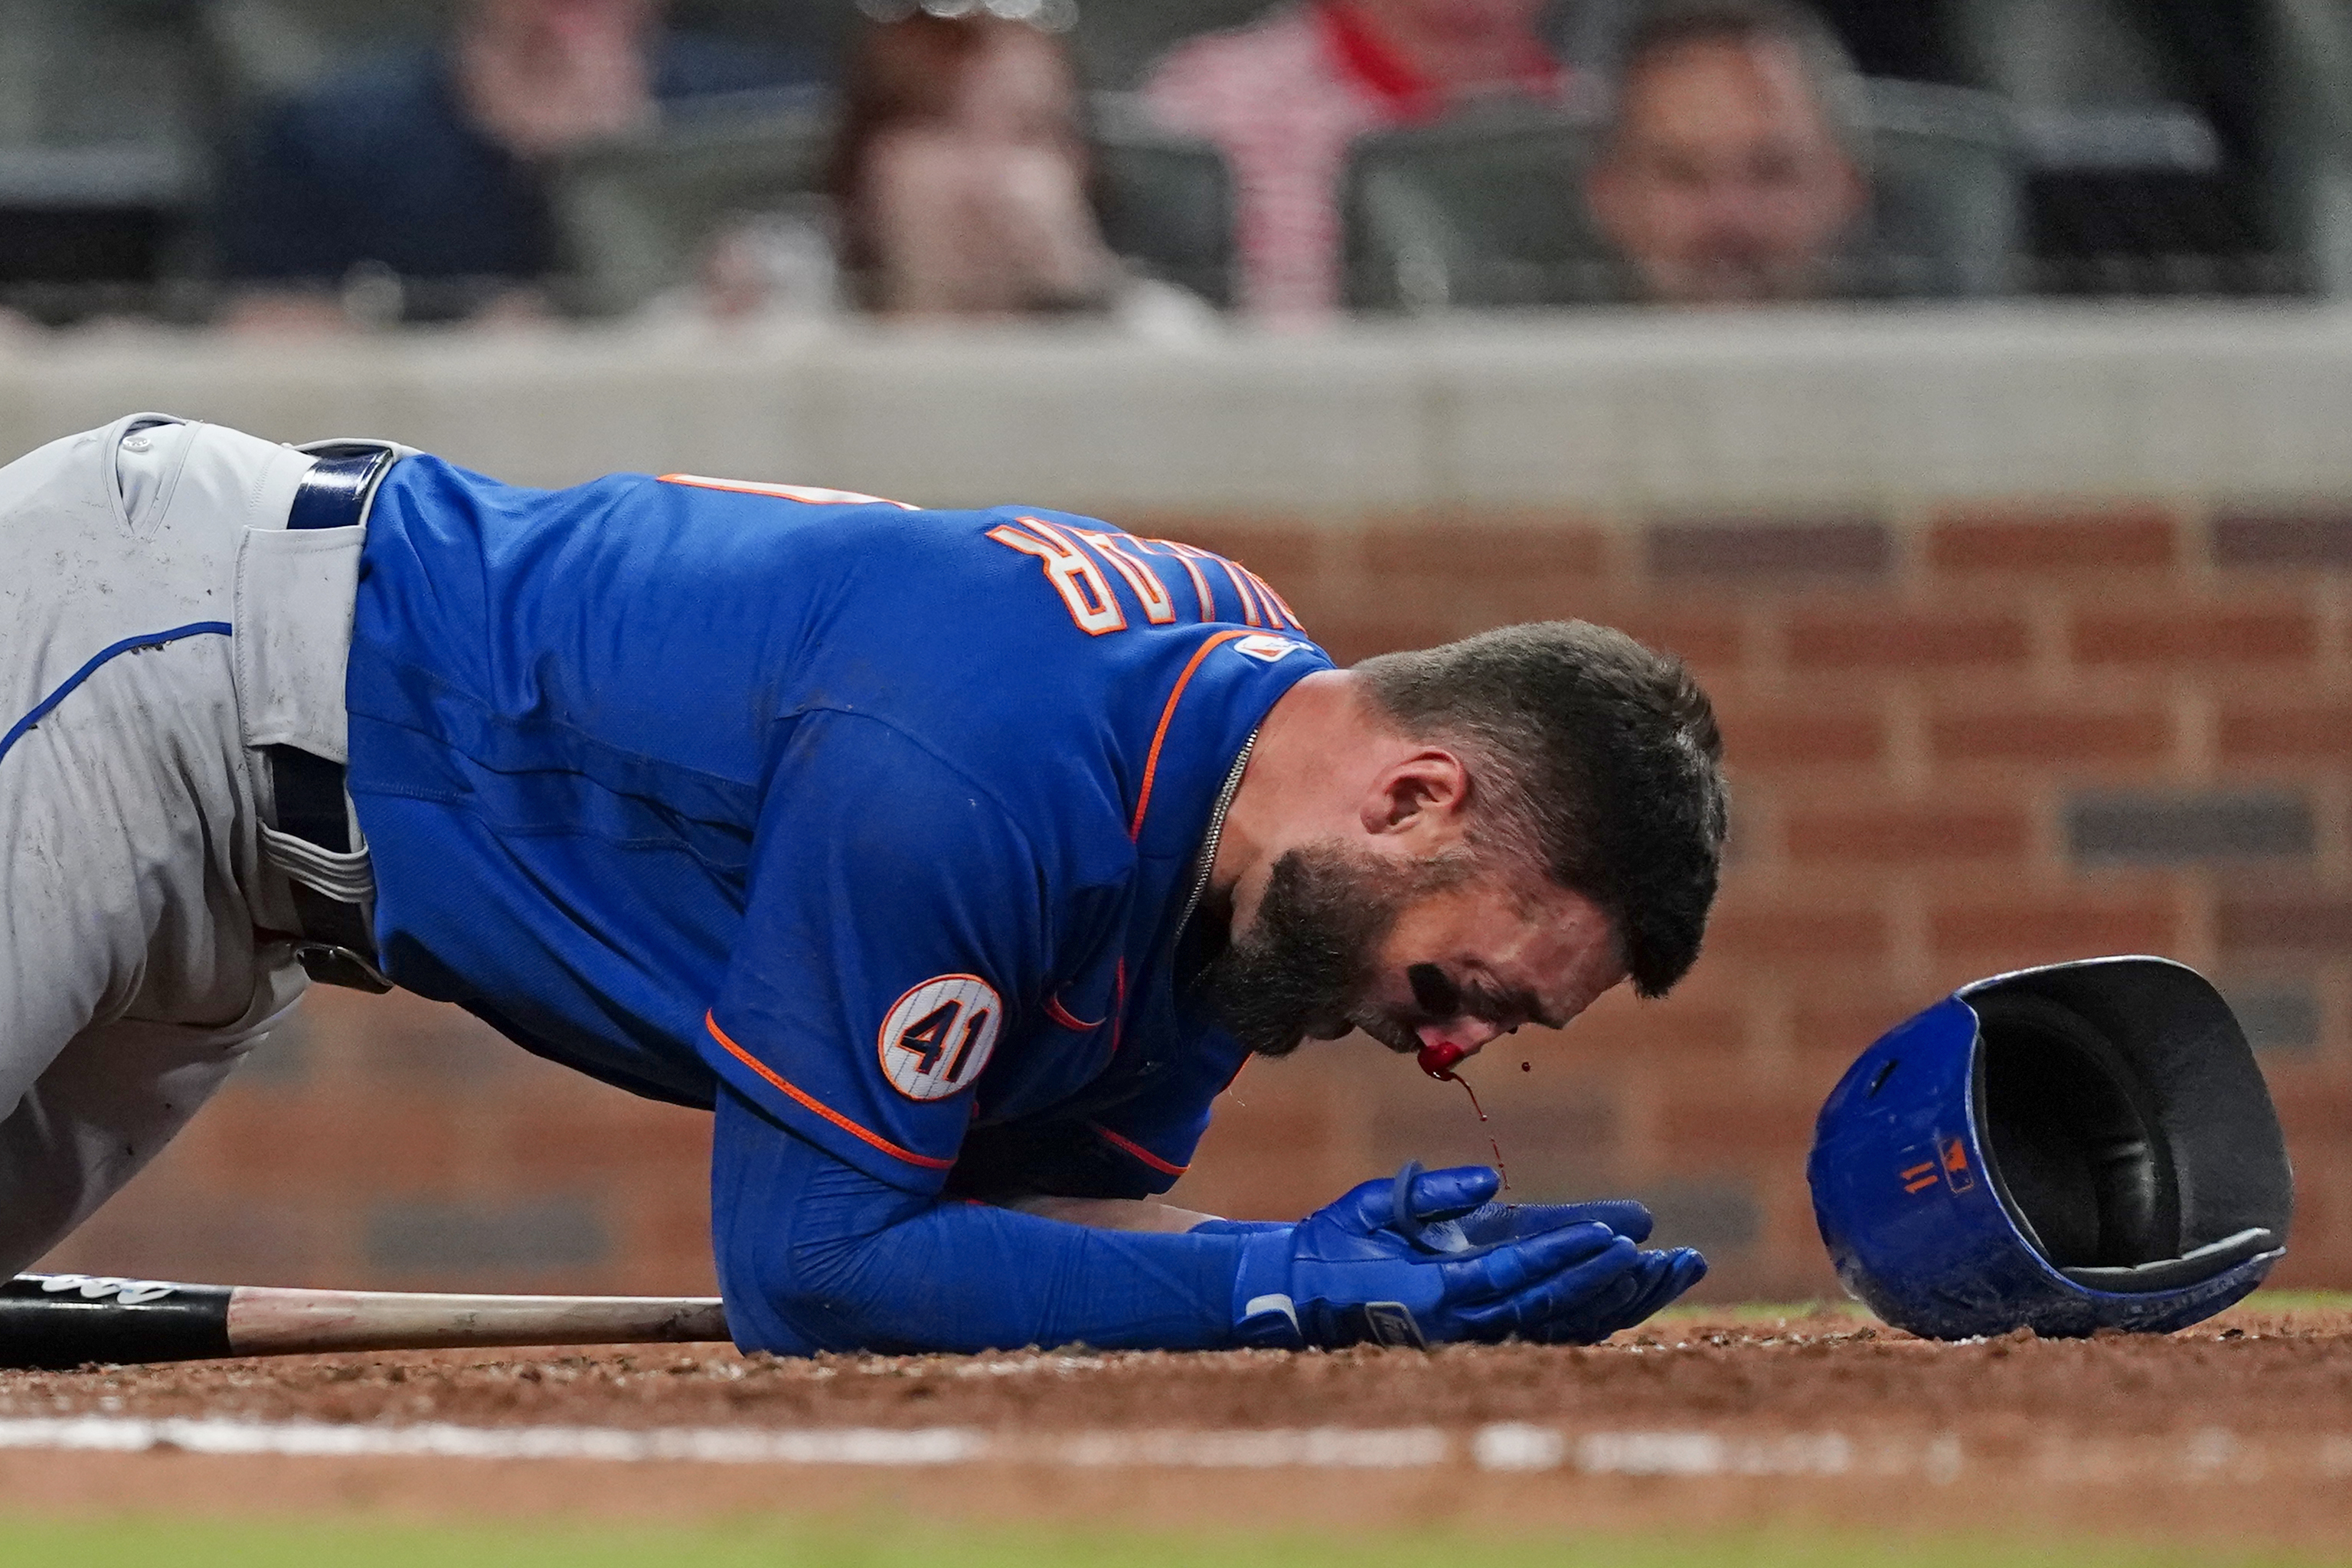 Mets update Kevin Pillar's status after taking fastball to the